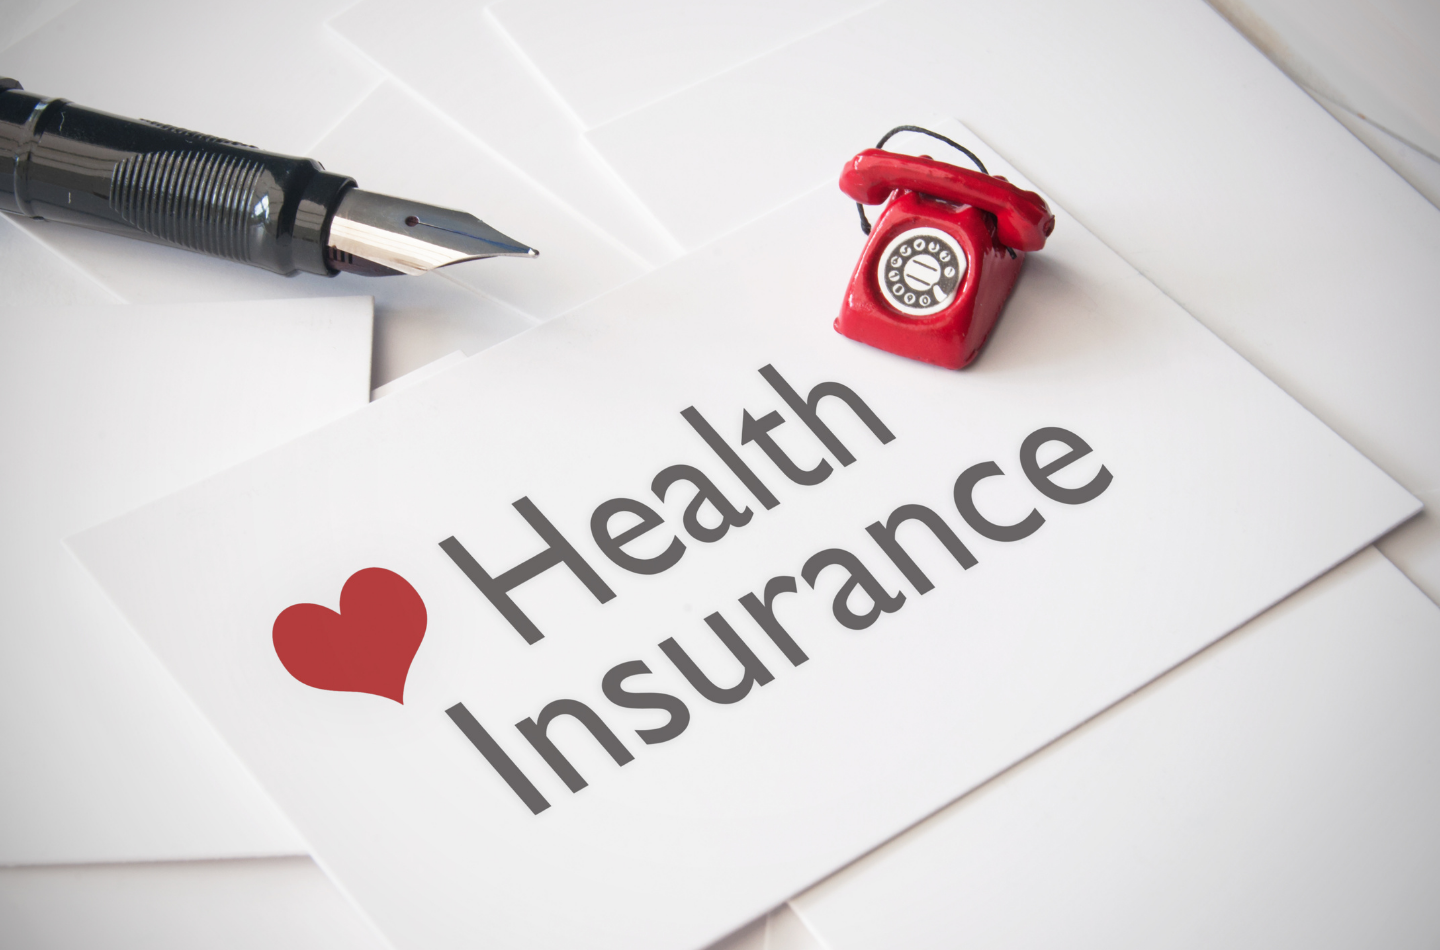 Health Insurance for Women in India - How to find the right Insurance Plan?